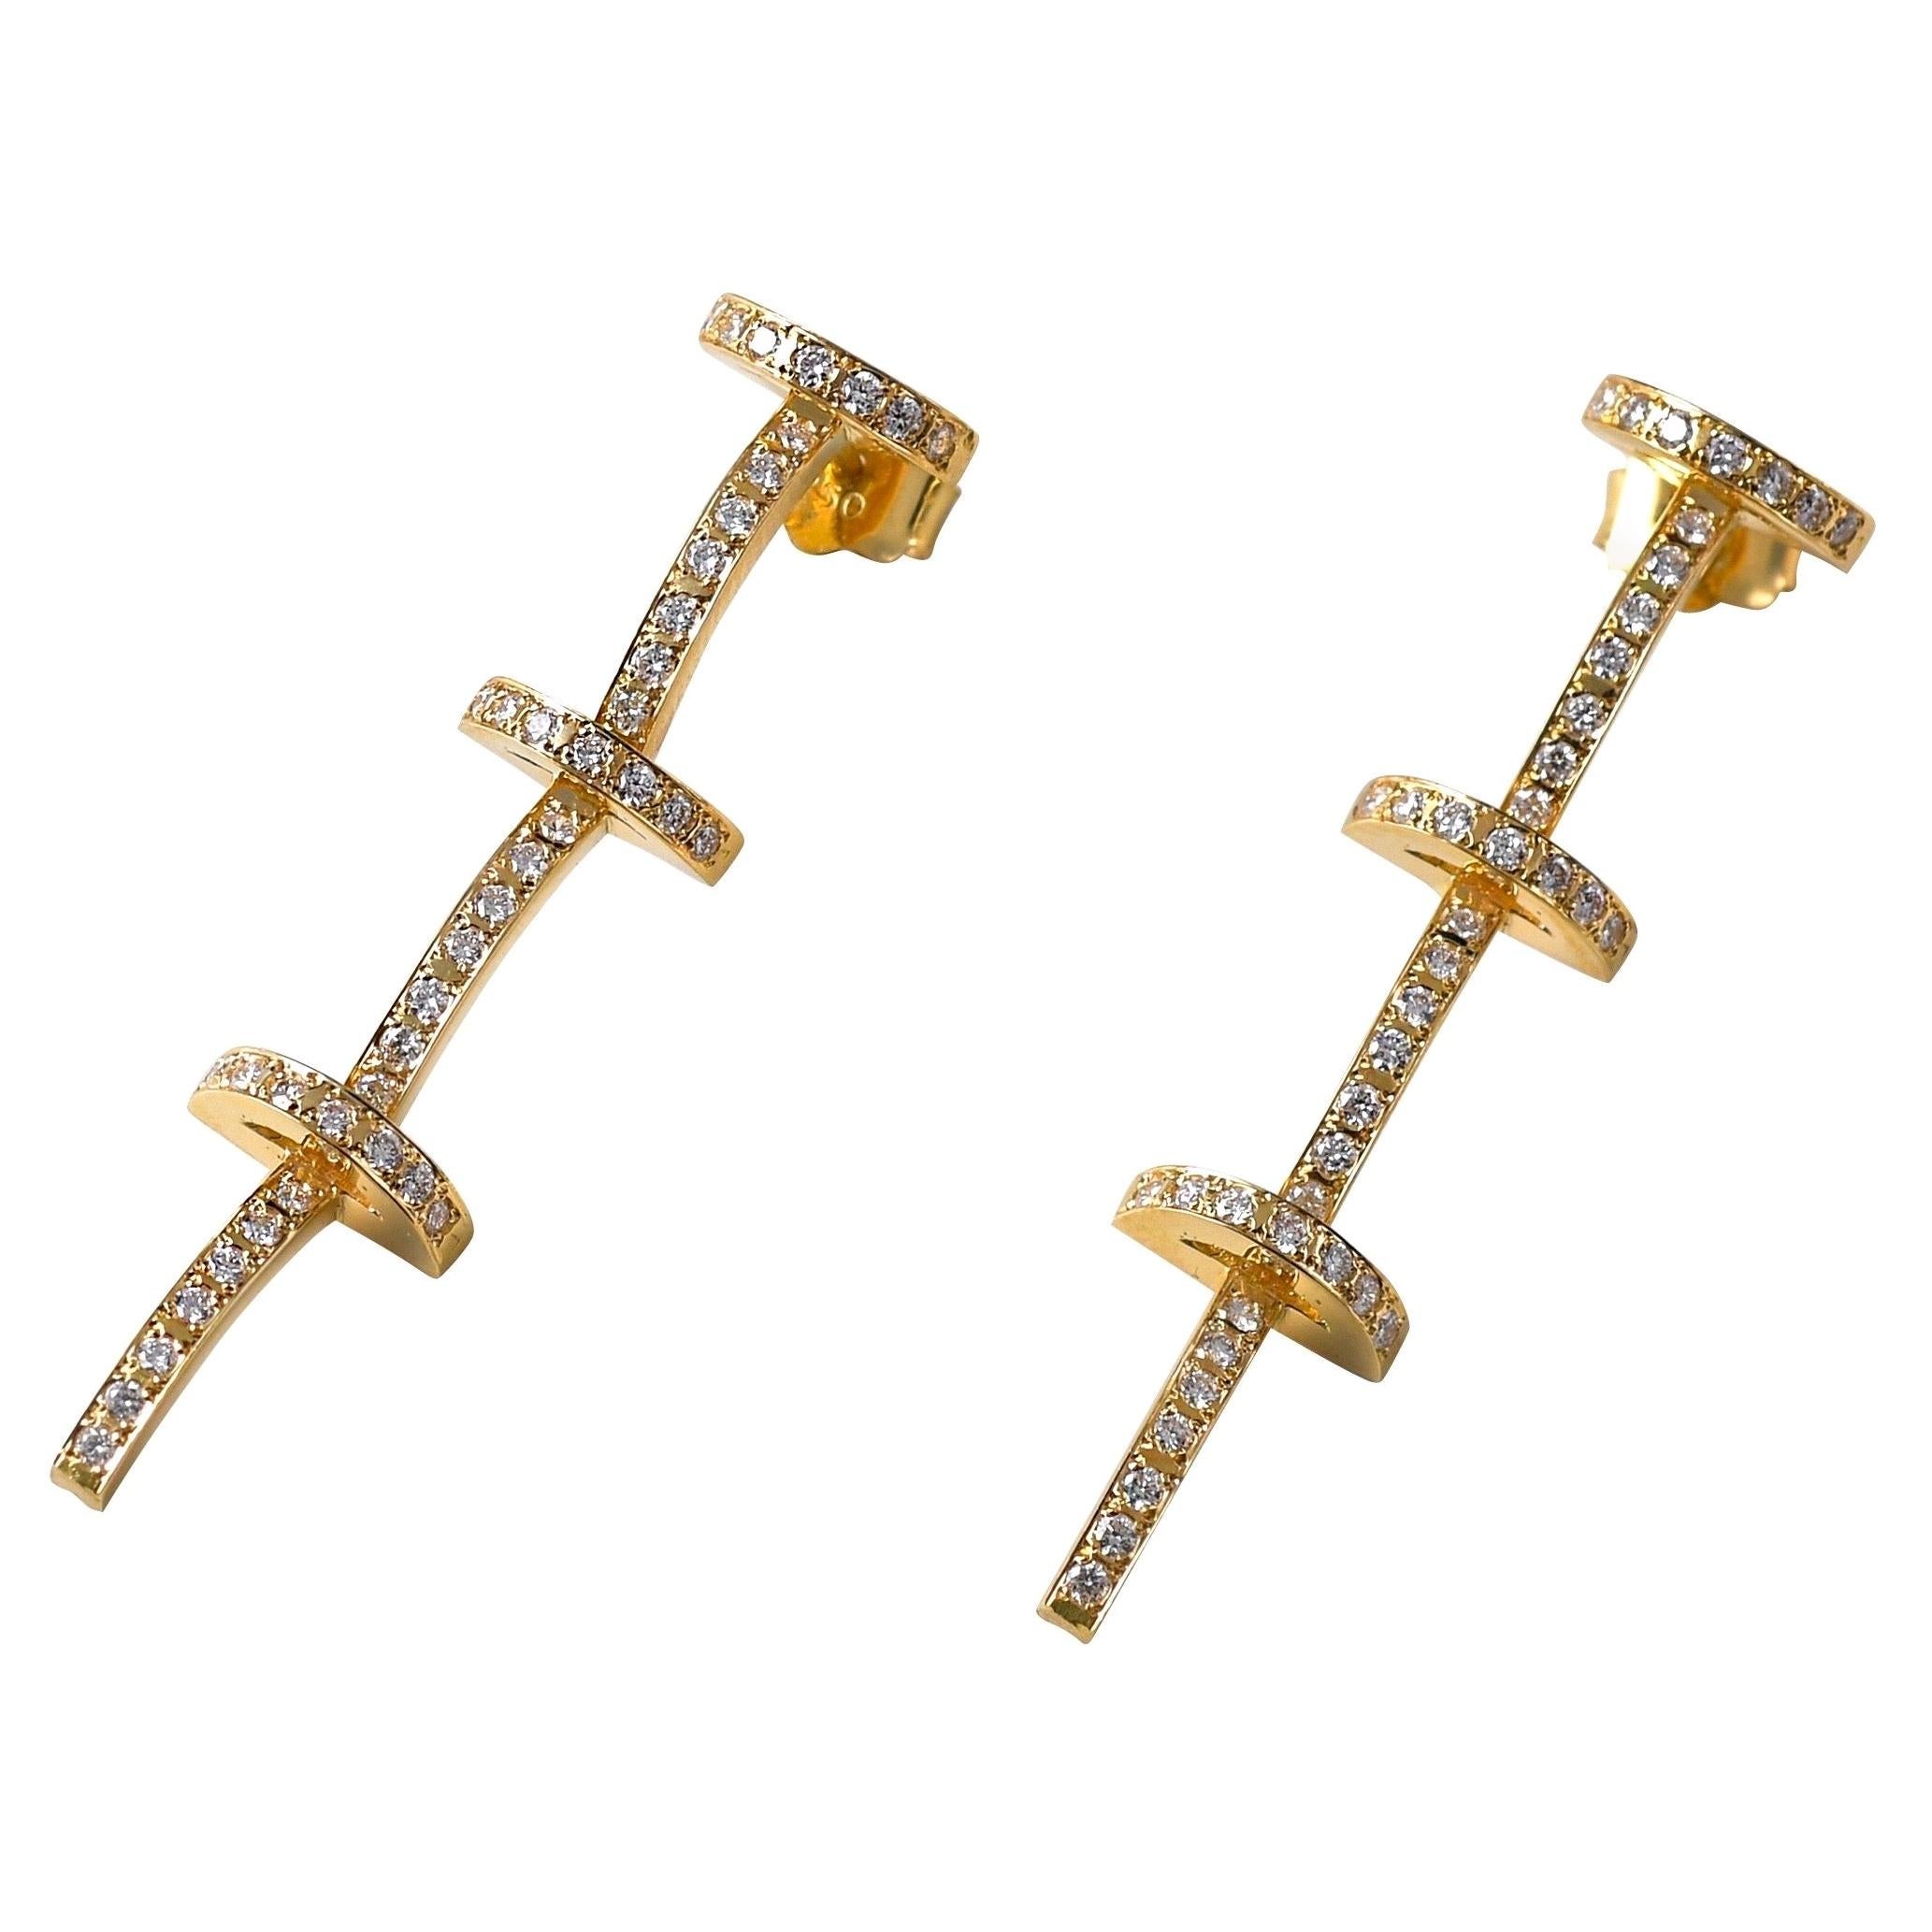 Contemporary Sculptural 18K Yellow Gold and White Diamond Long T Drop Earrings